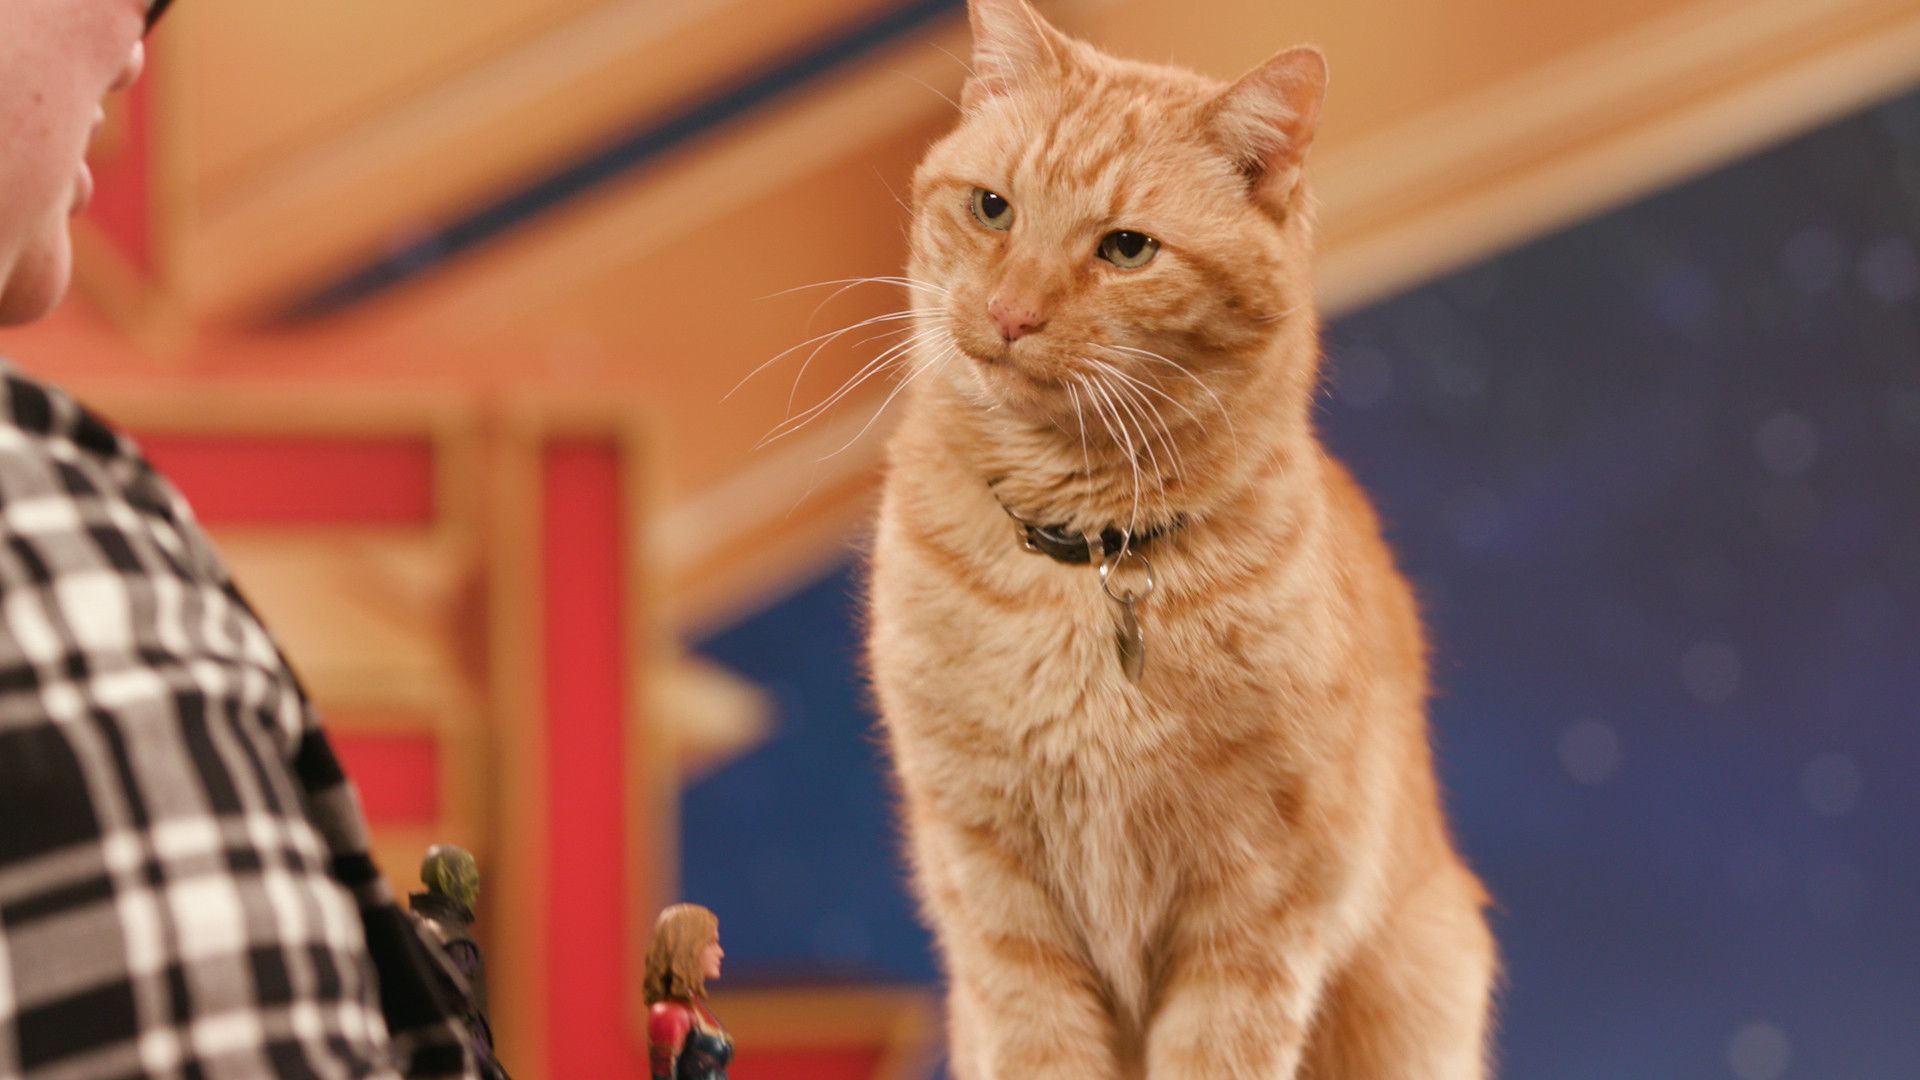 Captain Marvel's' breakout cat on his favorite costar and 'Avengers: Endgame' theories